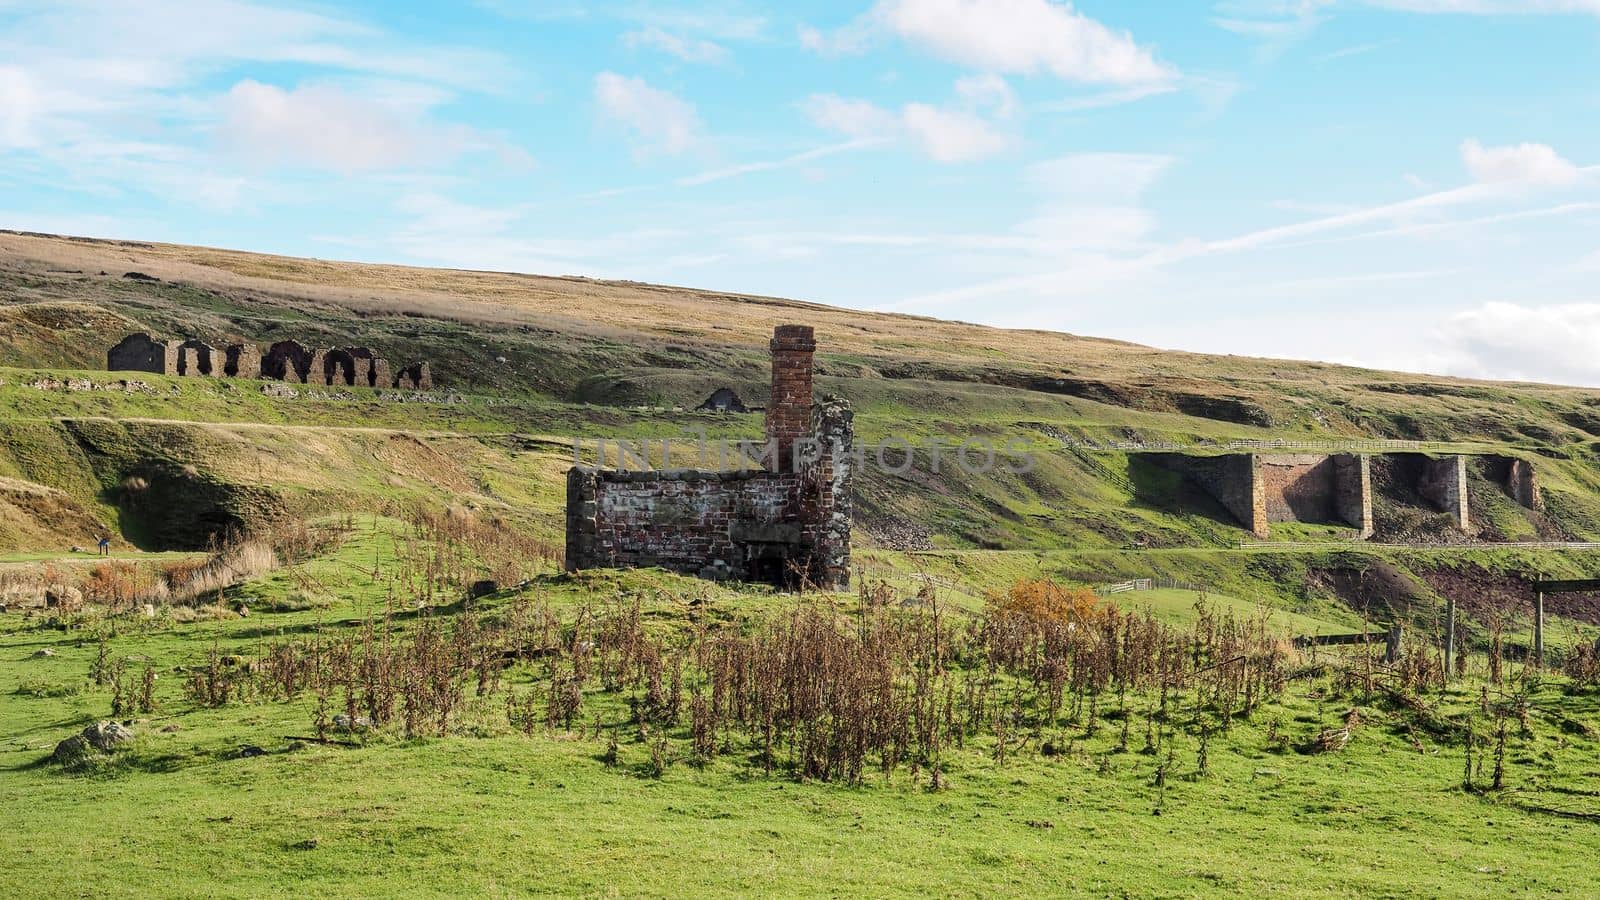 Derelict miners cottages and buildings and the ruins of the kilns of the East Rosedale Mines on the Rosedale Ironstone Railway, North York Moors National Park, UK